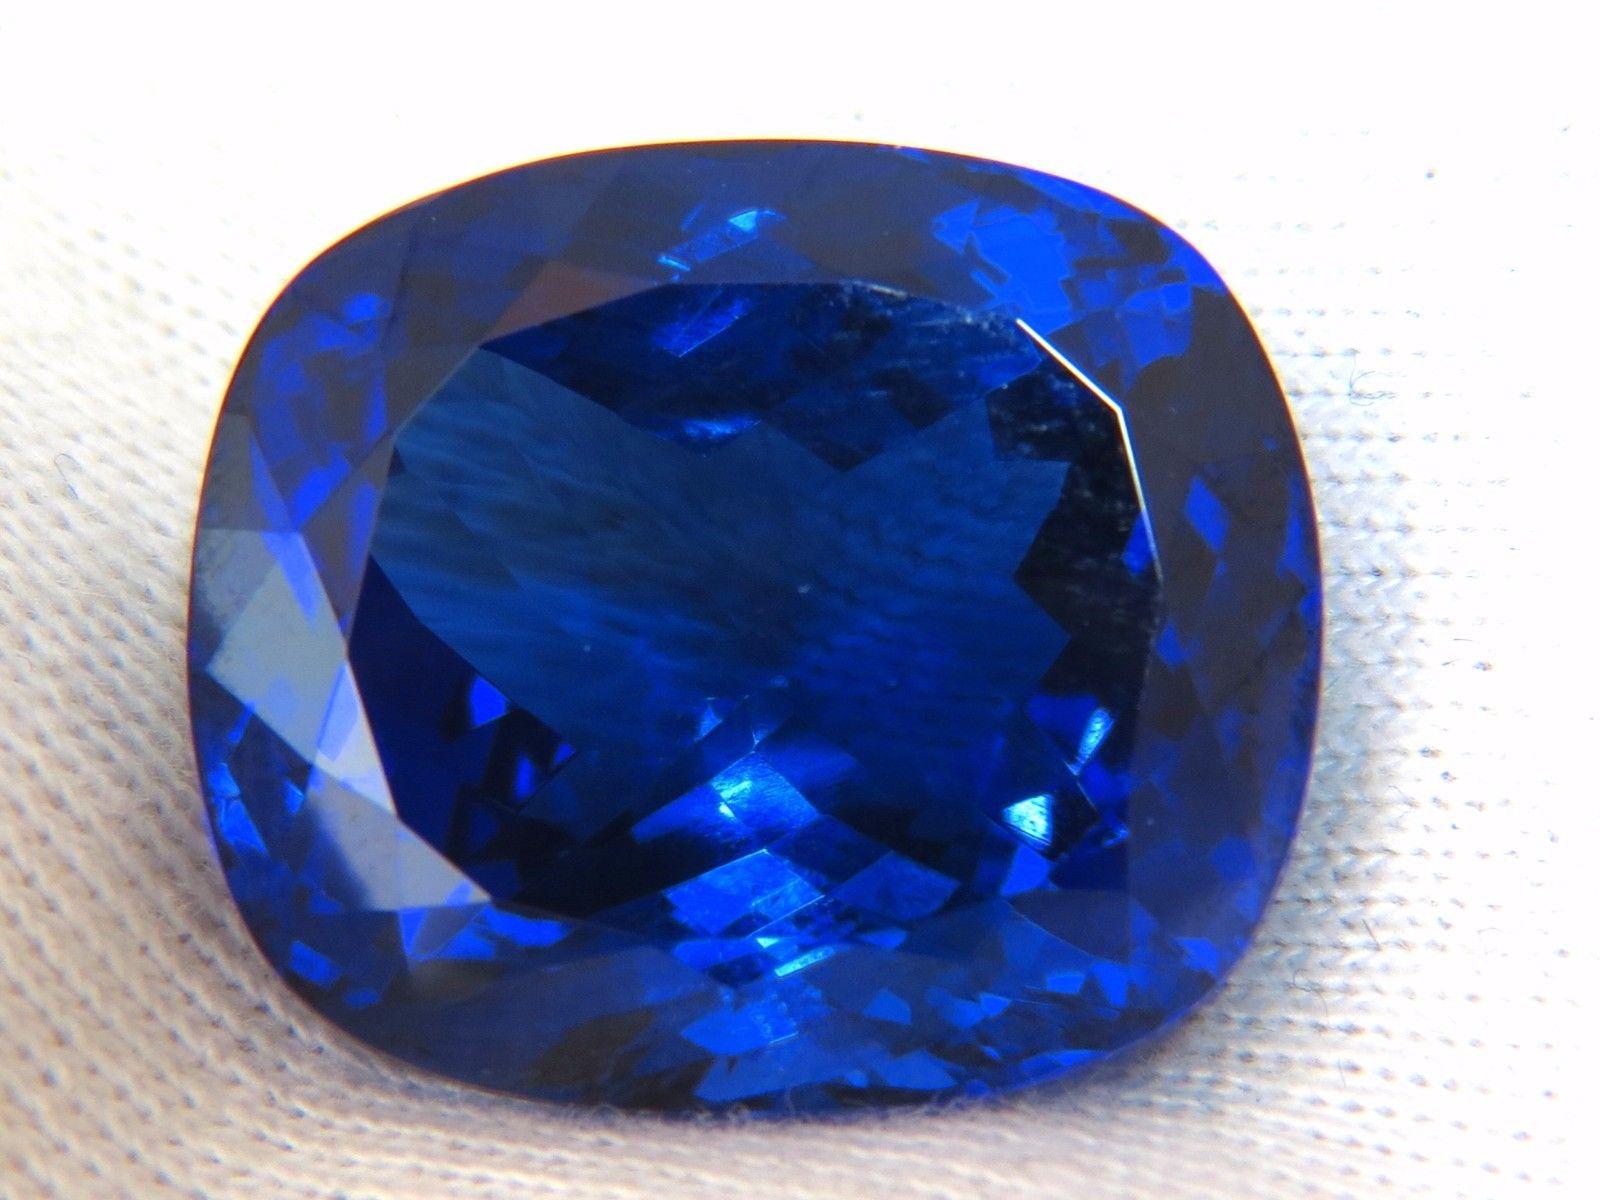 Tanzanite Royale.


GIA CERTIFIED
62.60ct. Natural Tanzanite

Clean VVS Clarity

Cushion Cut
Full transparency 

Classic vivid blue color


24.55 X 21.20 X 14.84mm

GIA Report #: 2135134690

A colorful tangible investment.


Please contact via